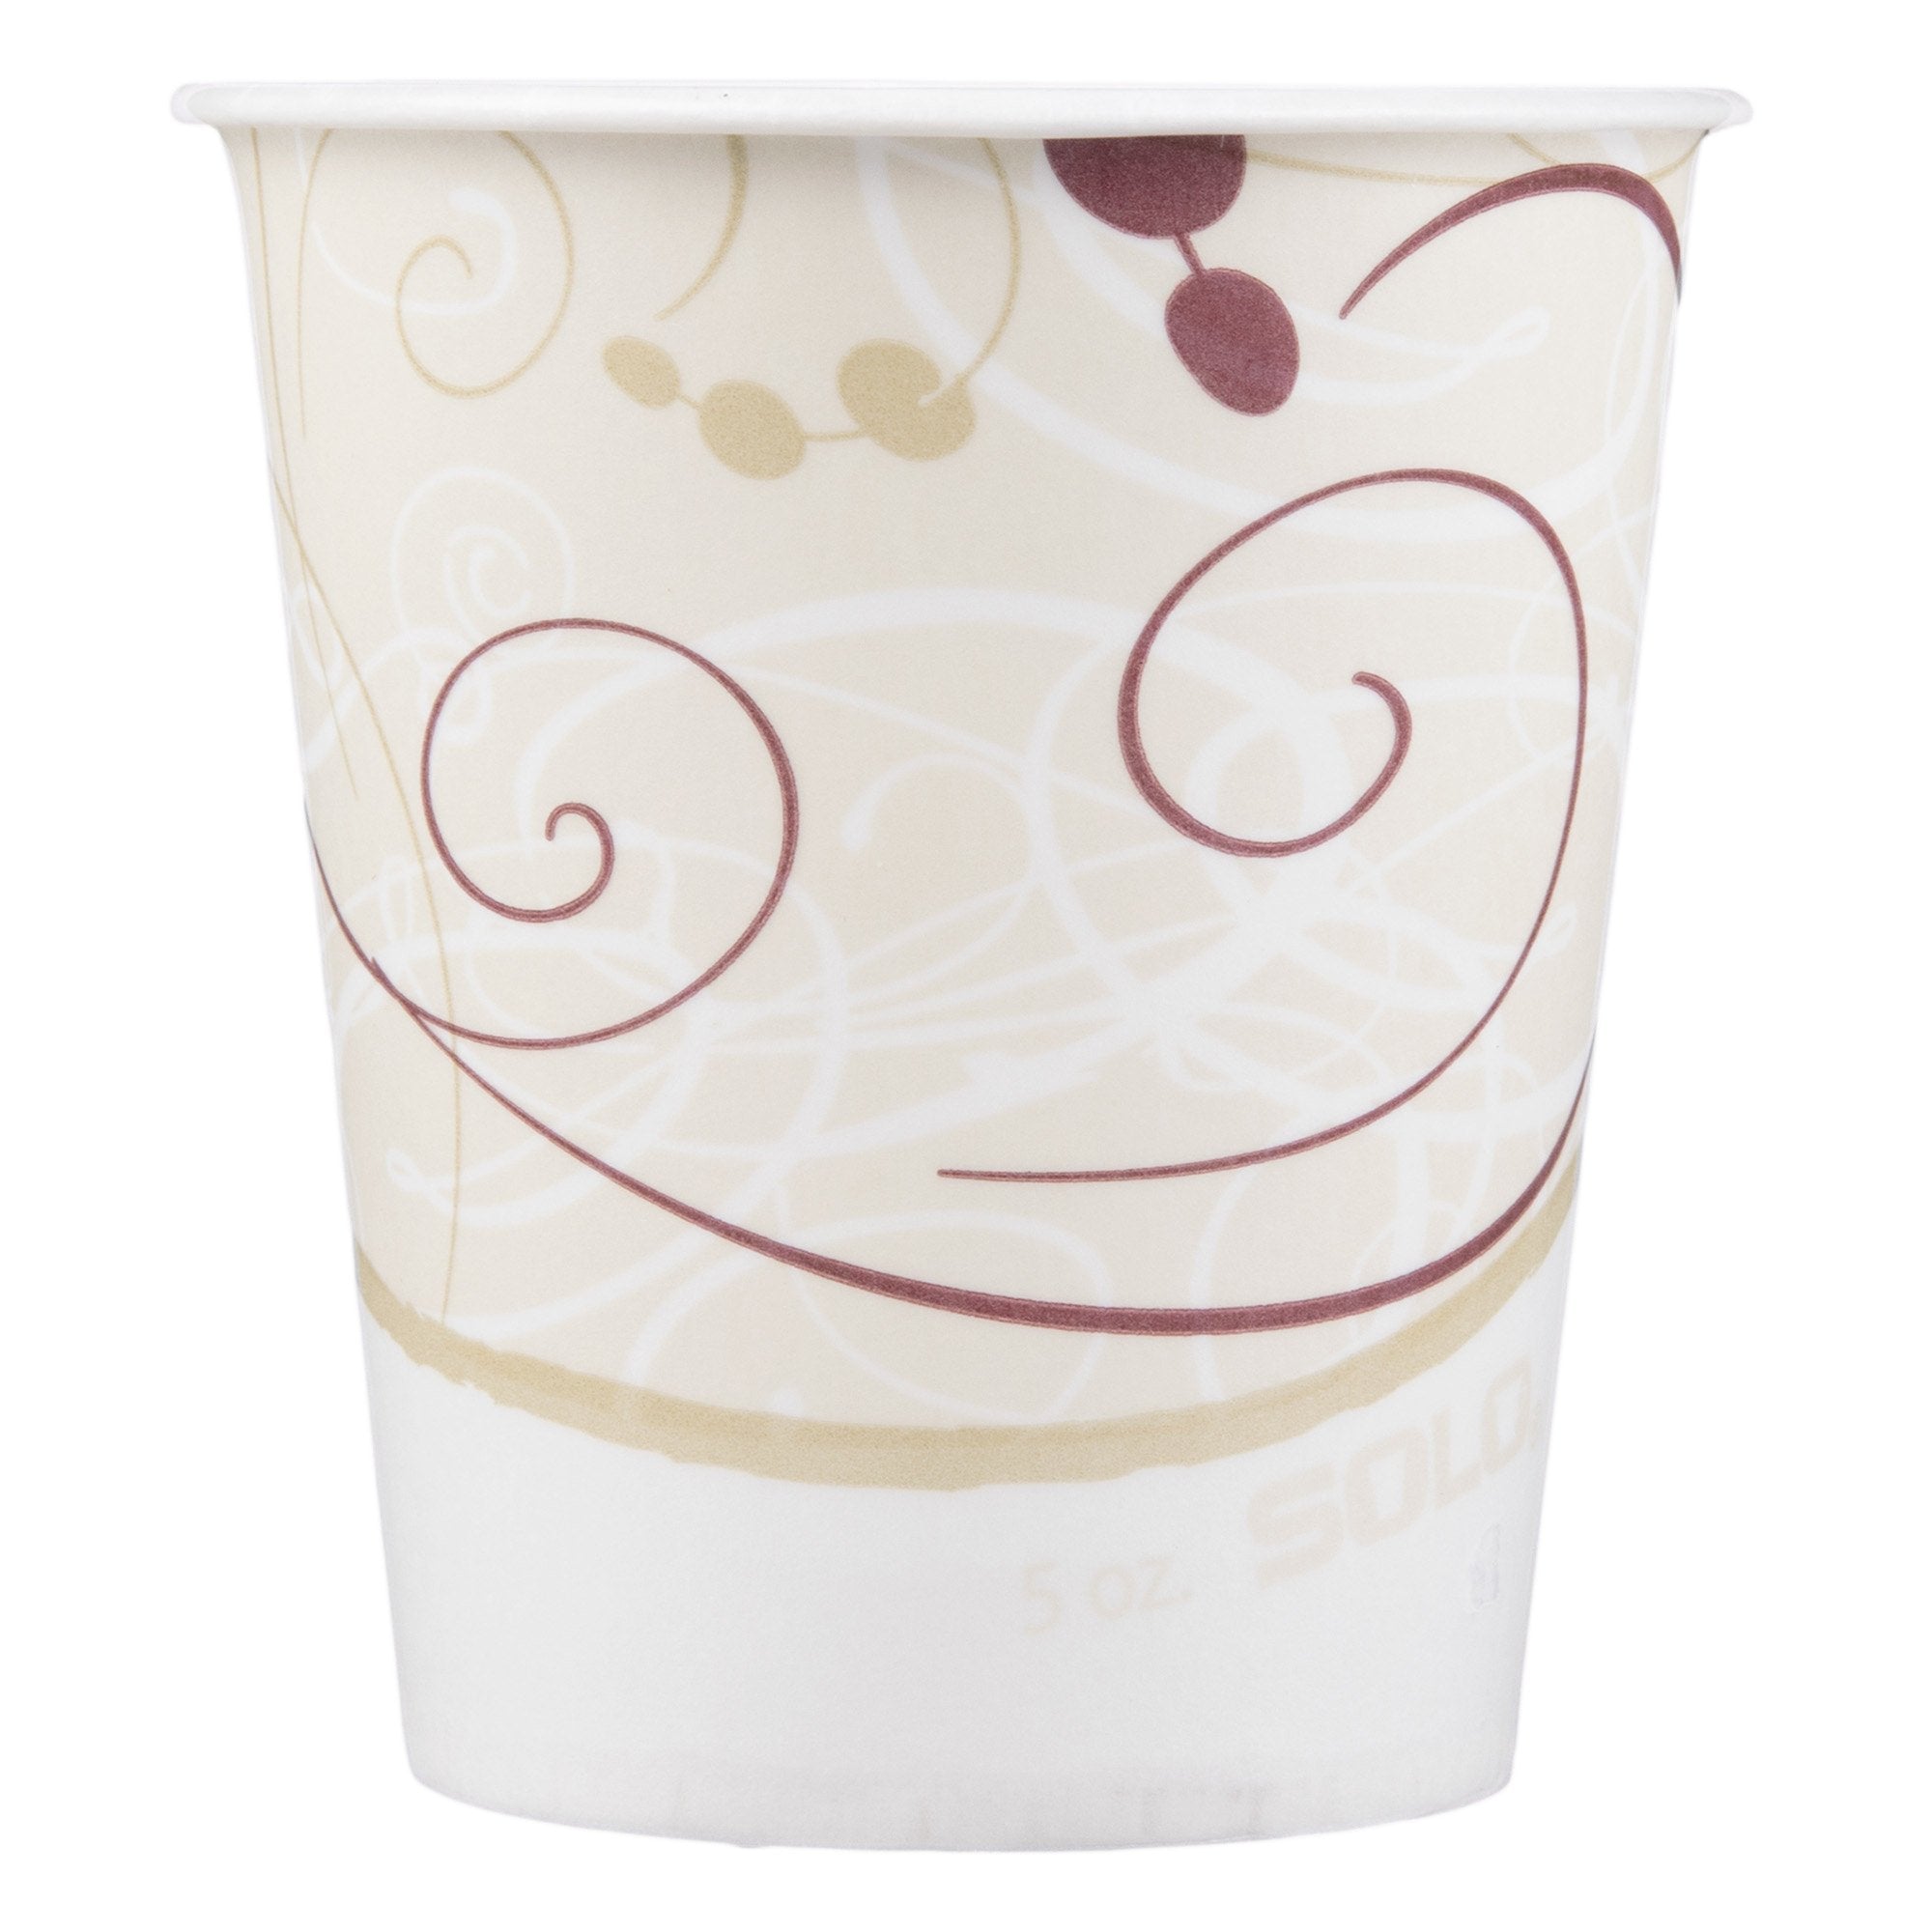 Drinking Cup Solo® 5 oz. Symphony® Print Wax Coated Paper Disposable